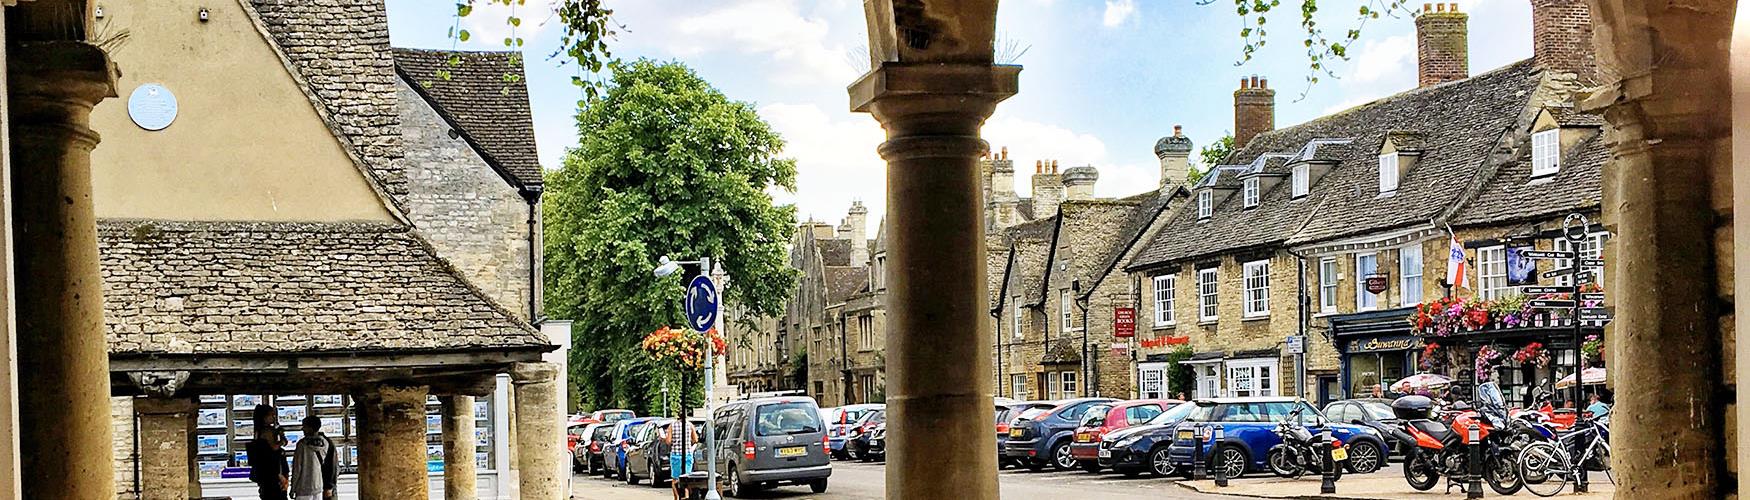 Witney town centre